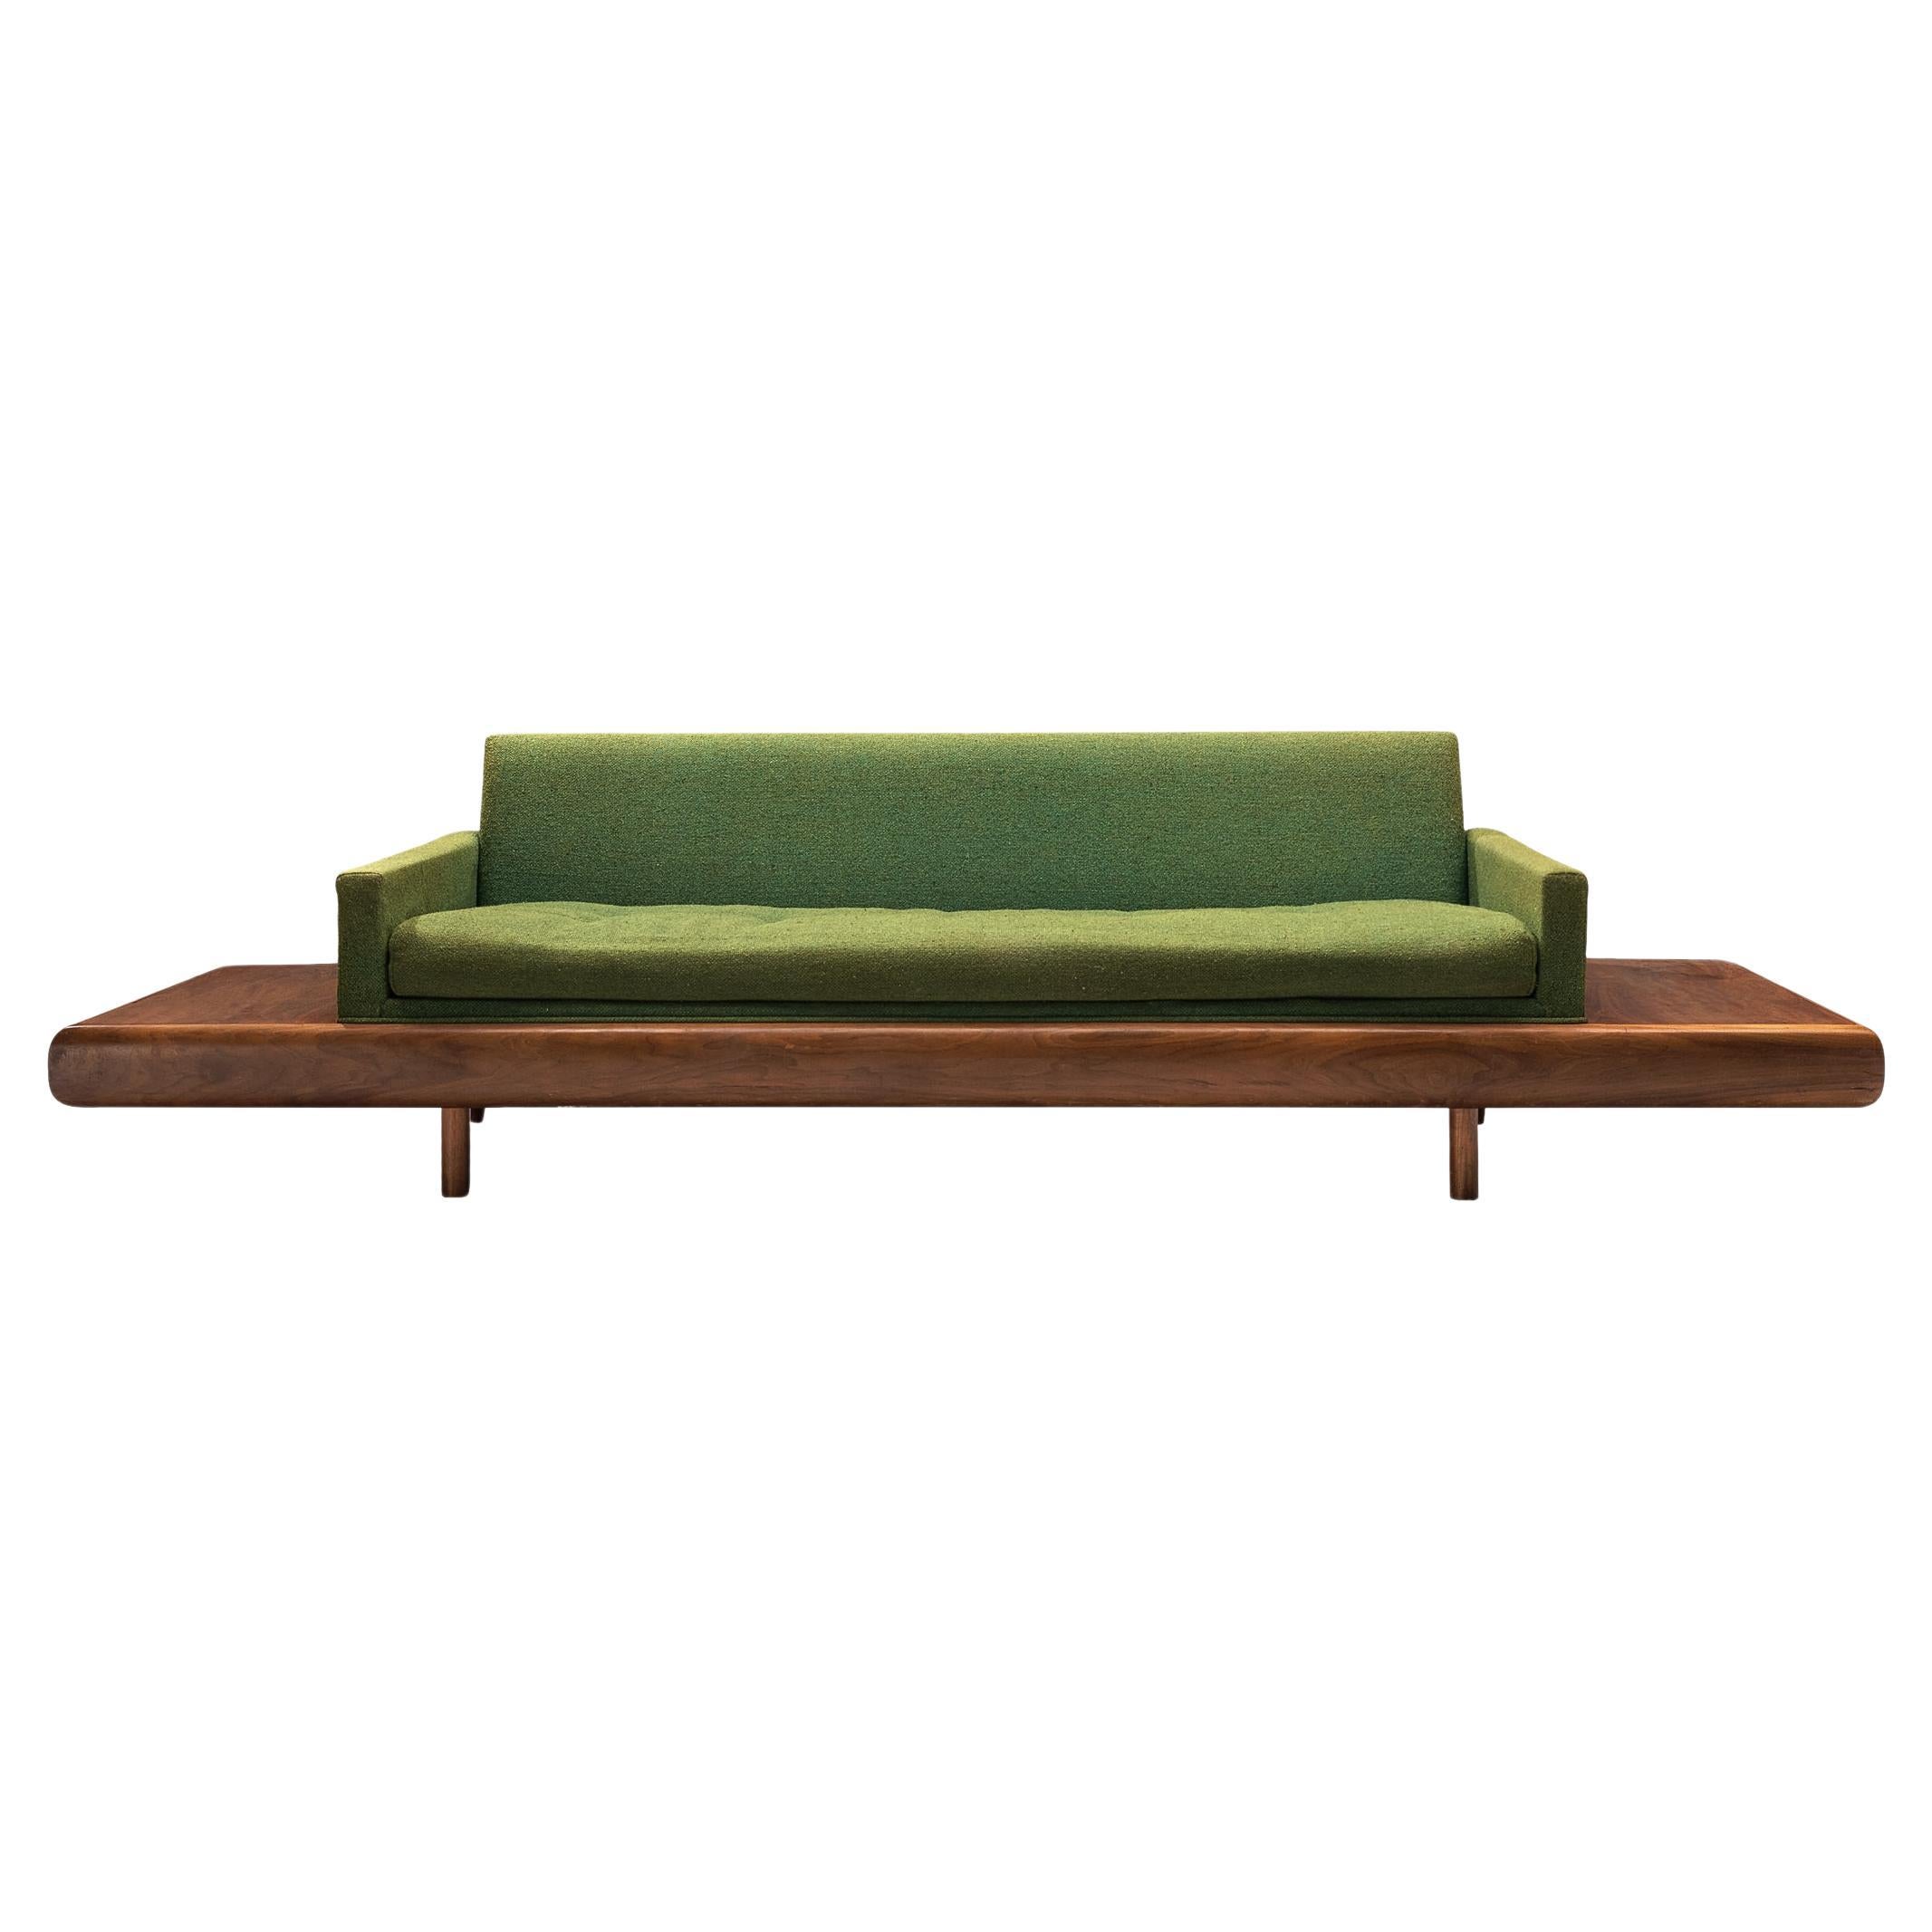 Adrian Pearsall Platform Sofa in Walnut and Green Upholstery 